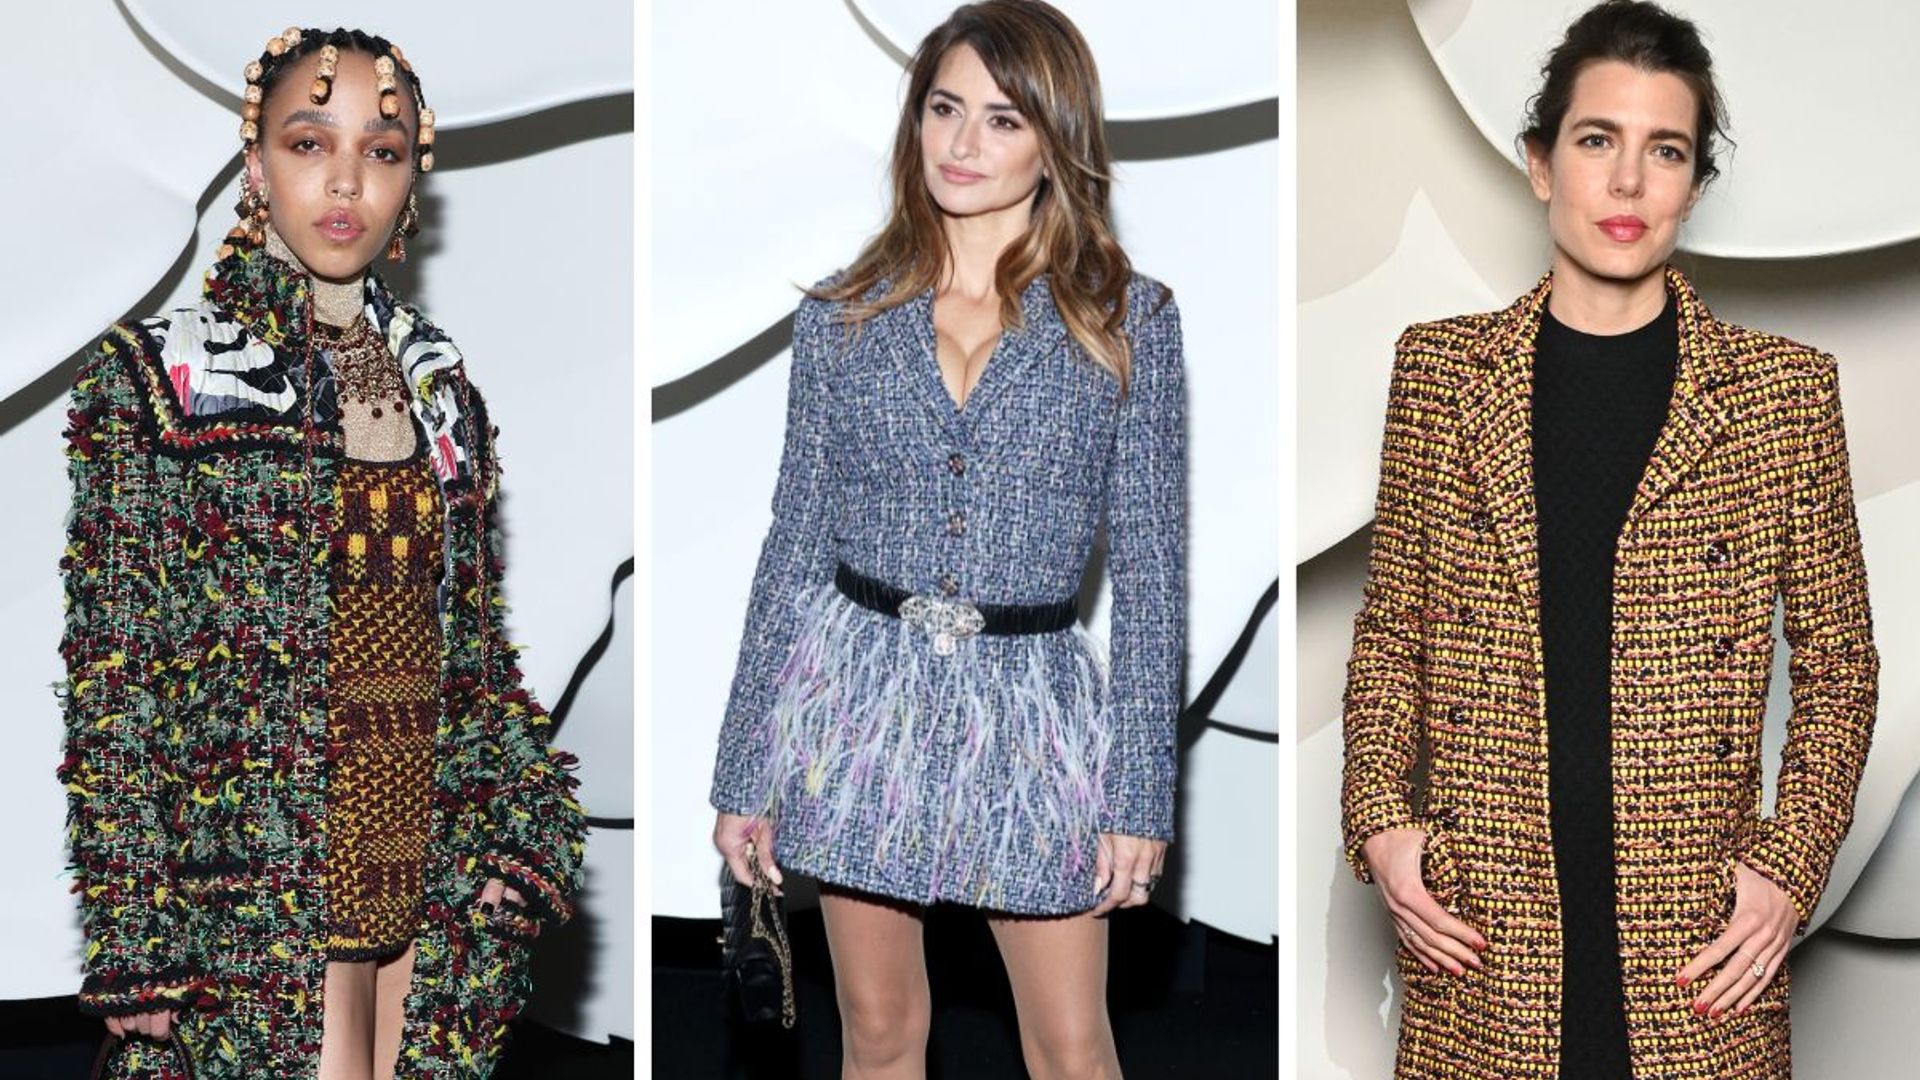 Penelope Cruz, Charlotte Casiraghi and FKA Twigs lead the glamour at the  Chanel show - see photos